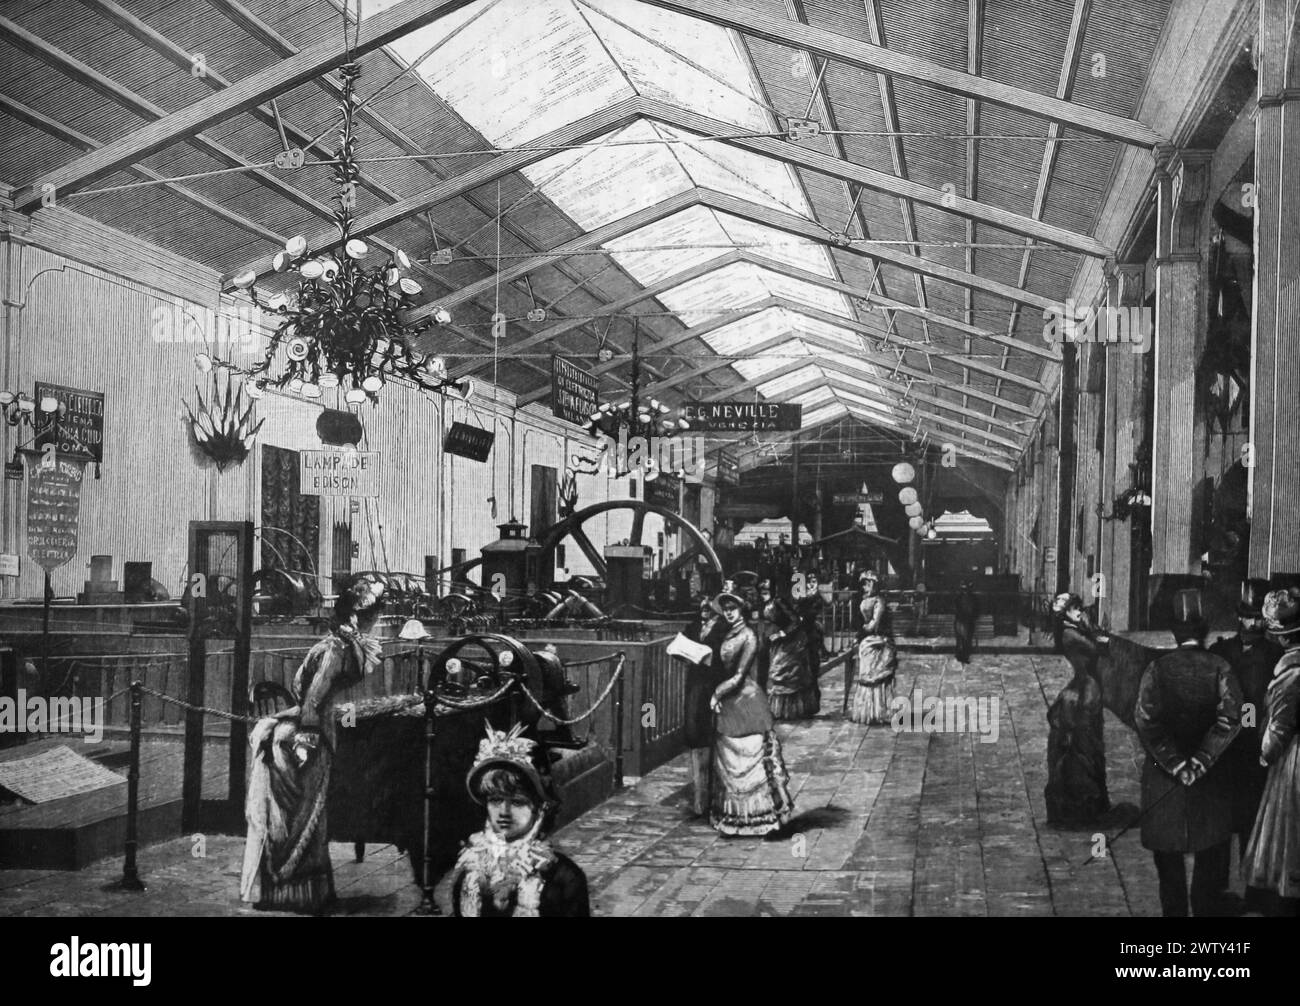 Kingdom of Italy. Expositions, technology, innovation. Electricity gallery at the exposition of Turin, 1884. Italy. Of a photographic reproduction Stock Photo